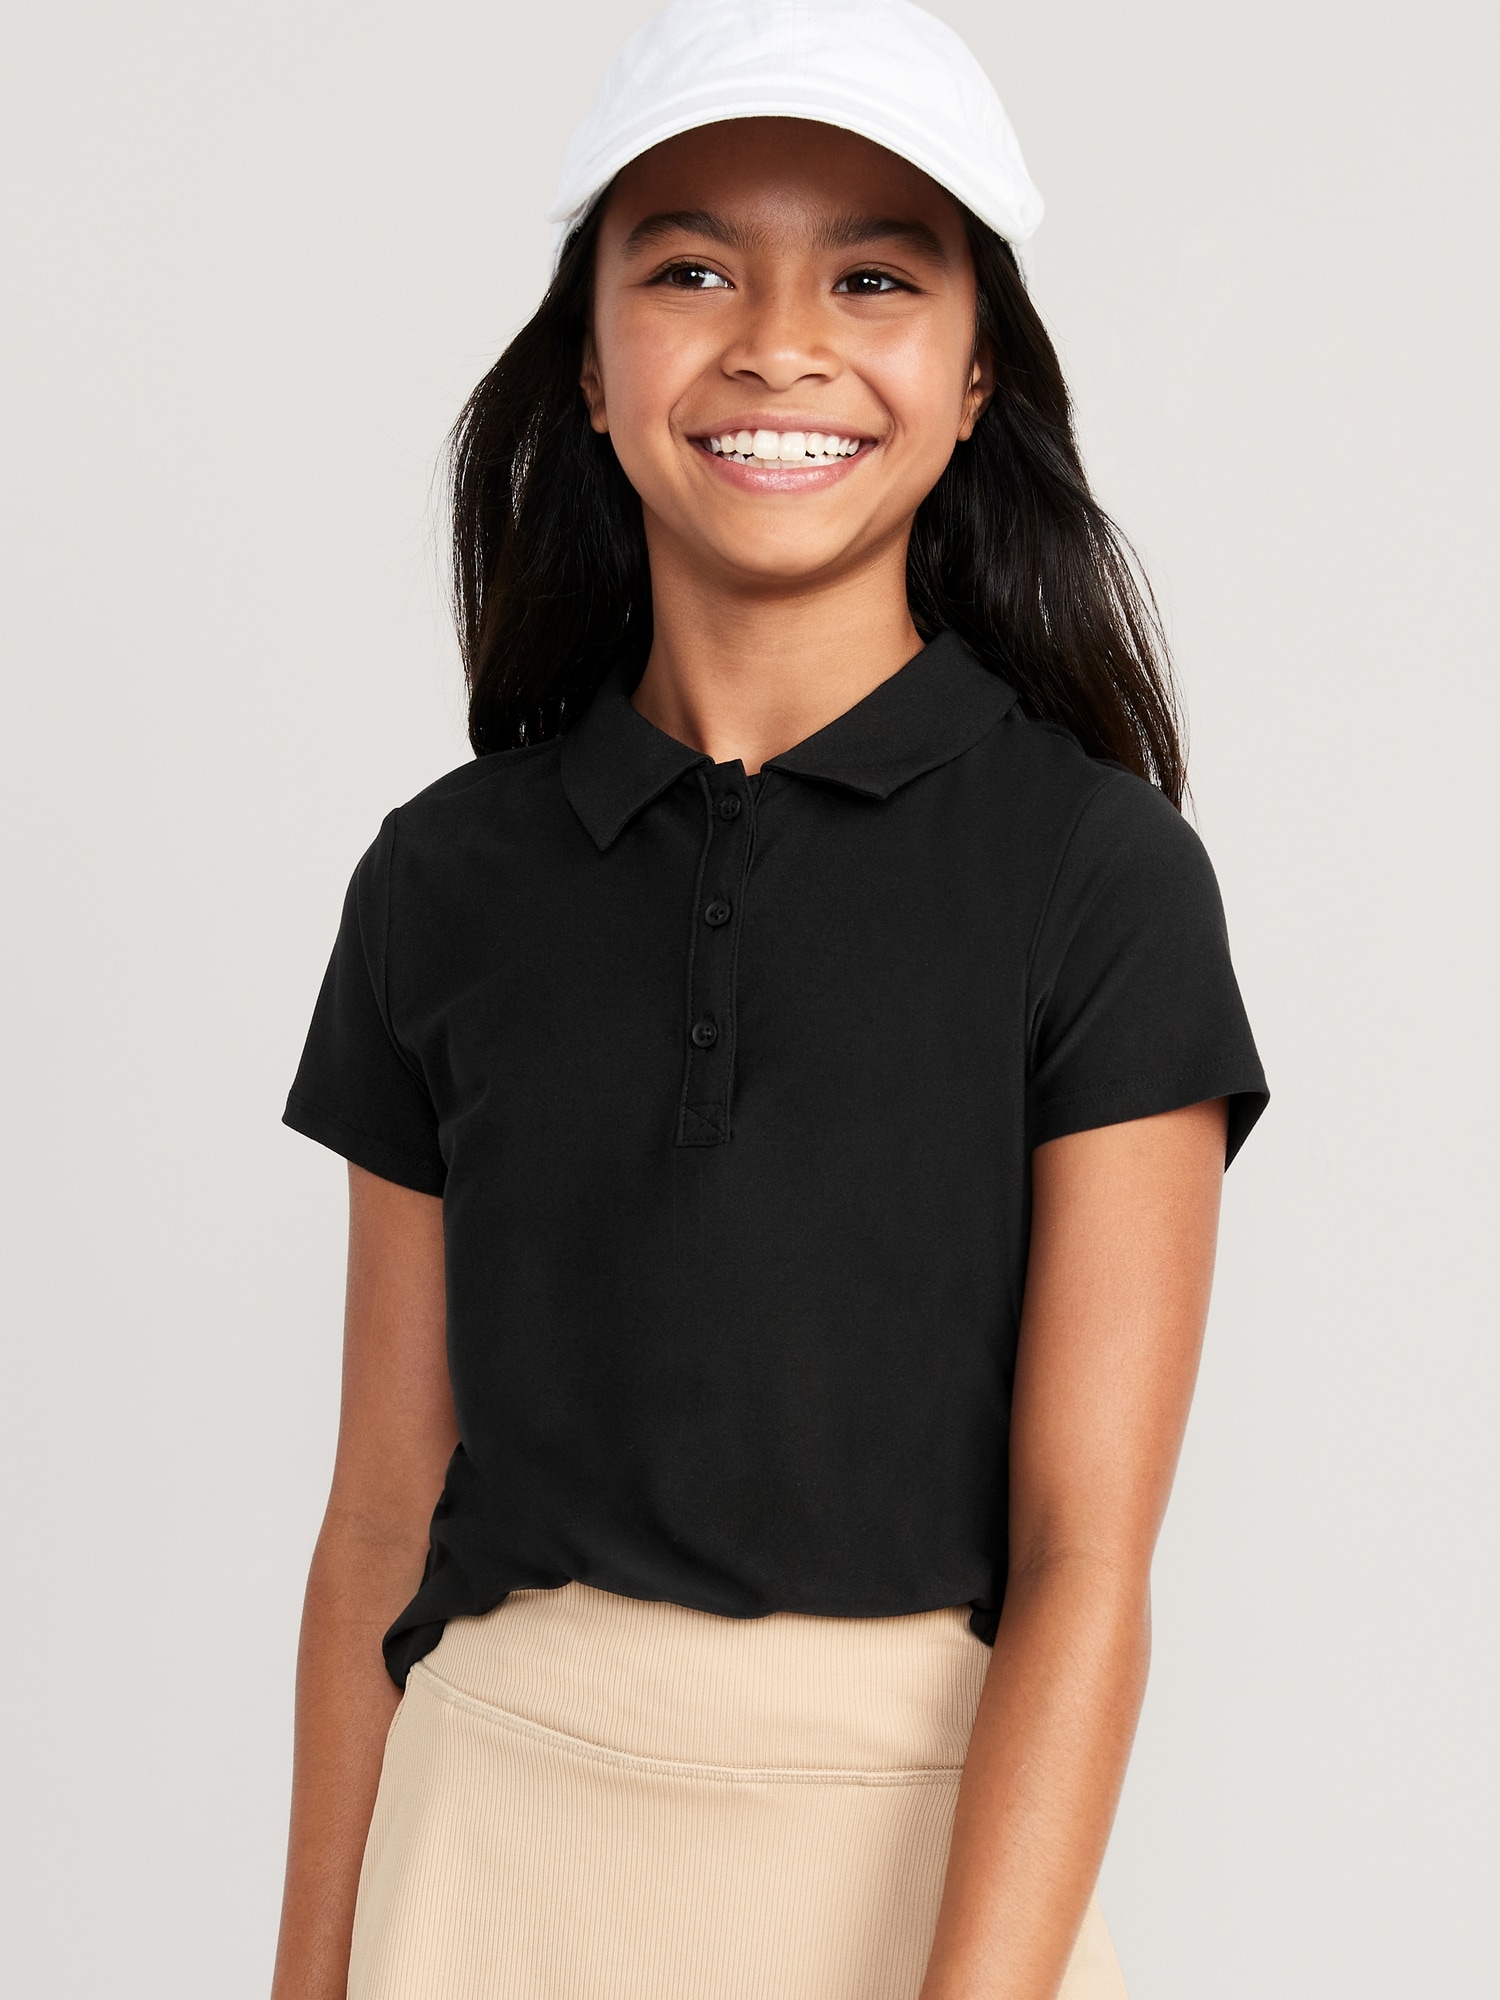 Shop back-to-school uniforms from Old Navy, Gap and more - Good